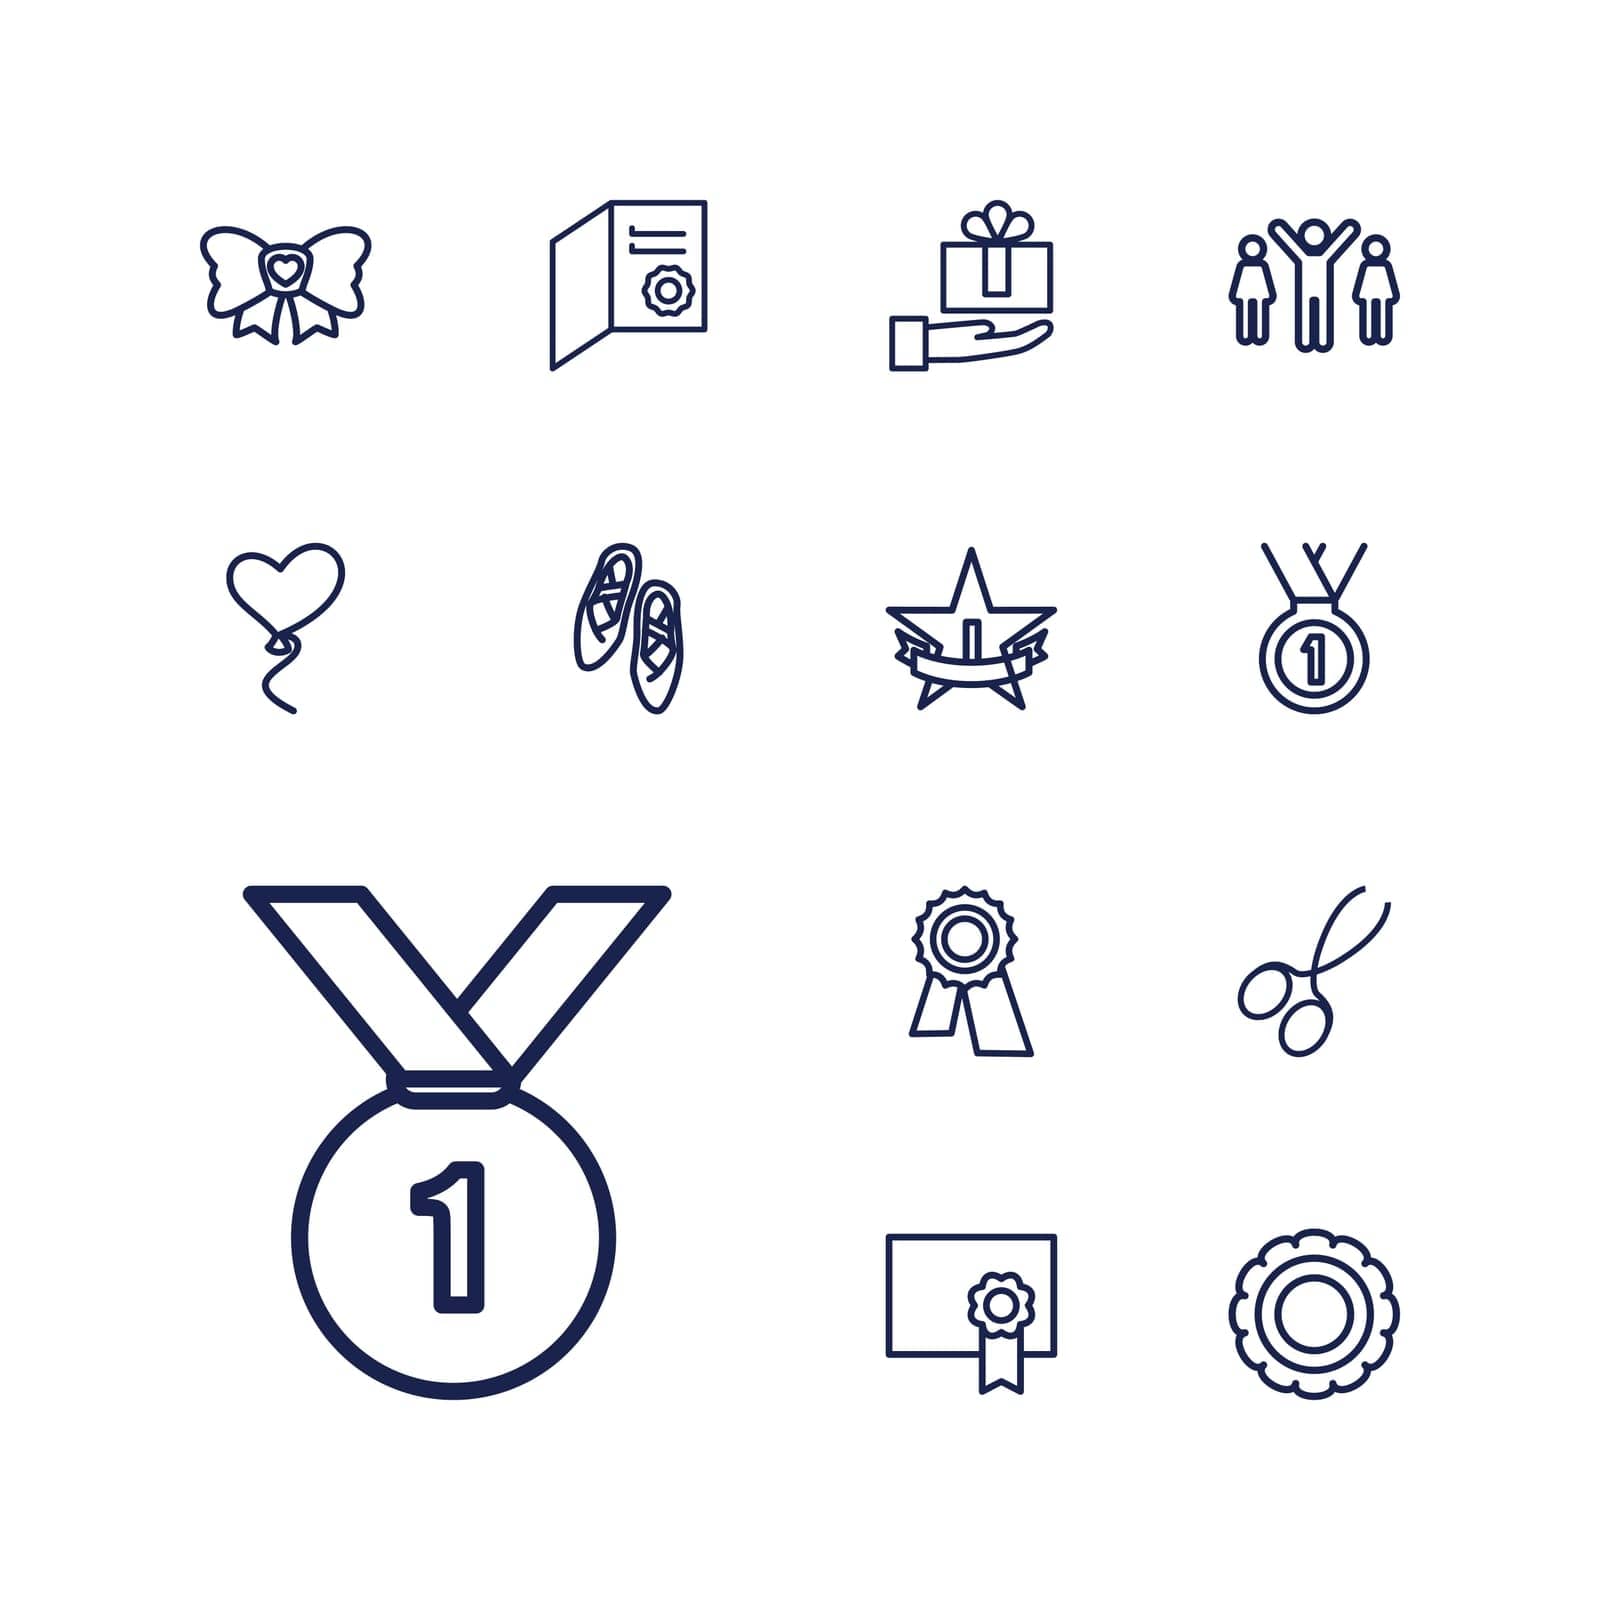 gift,symbol,achievement,balloons,icon,sign,isolated,competition,best,bow,number,award,white,design,medal,vector,place,diploma,celebrating,decoration,graphic,hand,element,on,st,set,star,victory,ribbon,ballet,shoes,heart,scissors,badge,celebration,winner,background,success,illustration,manicure,first by ogqcorp